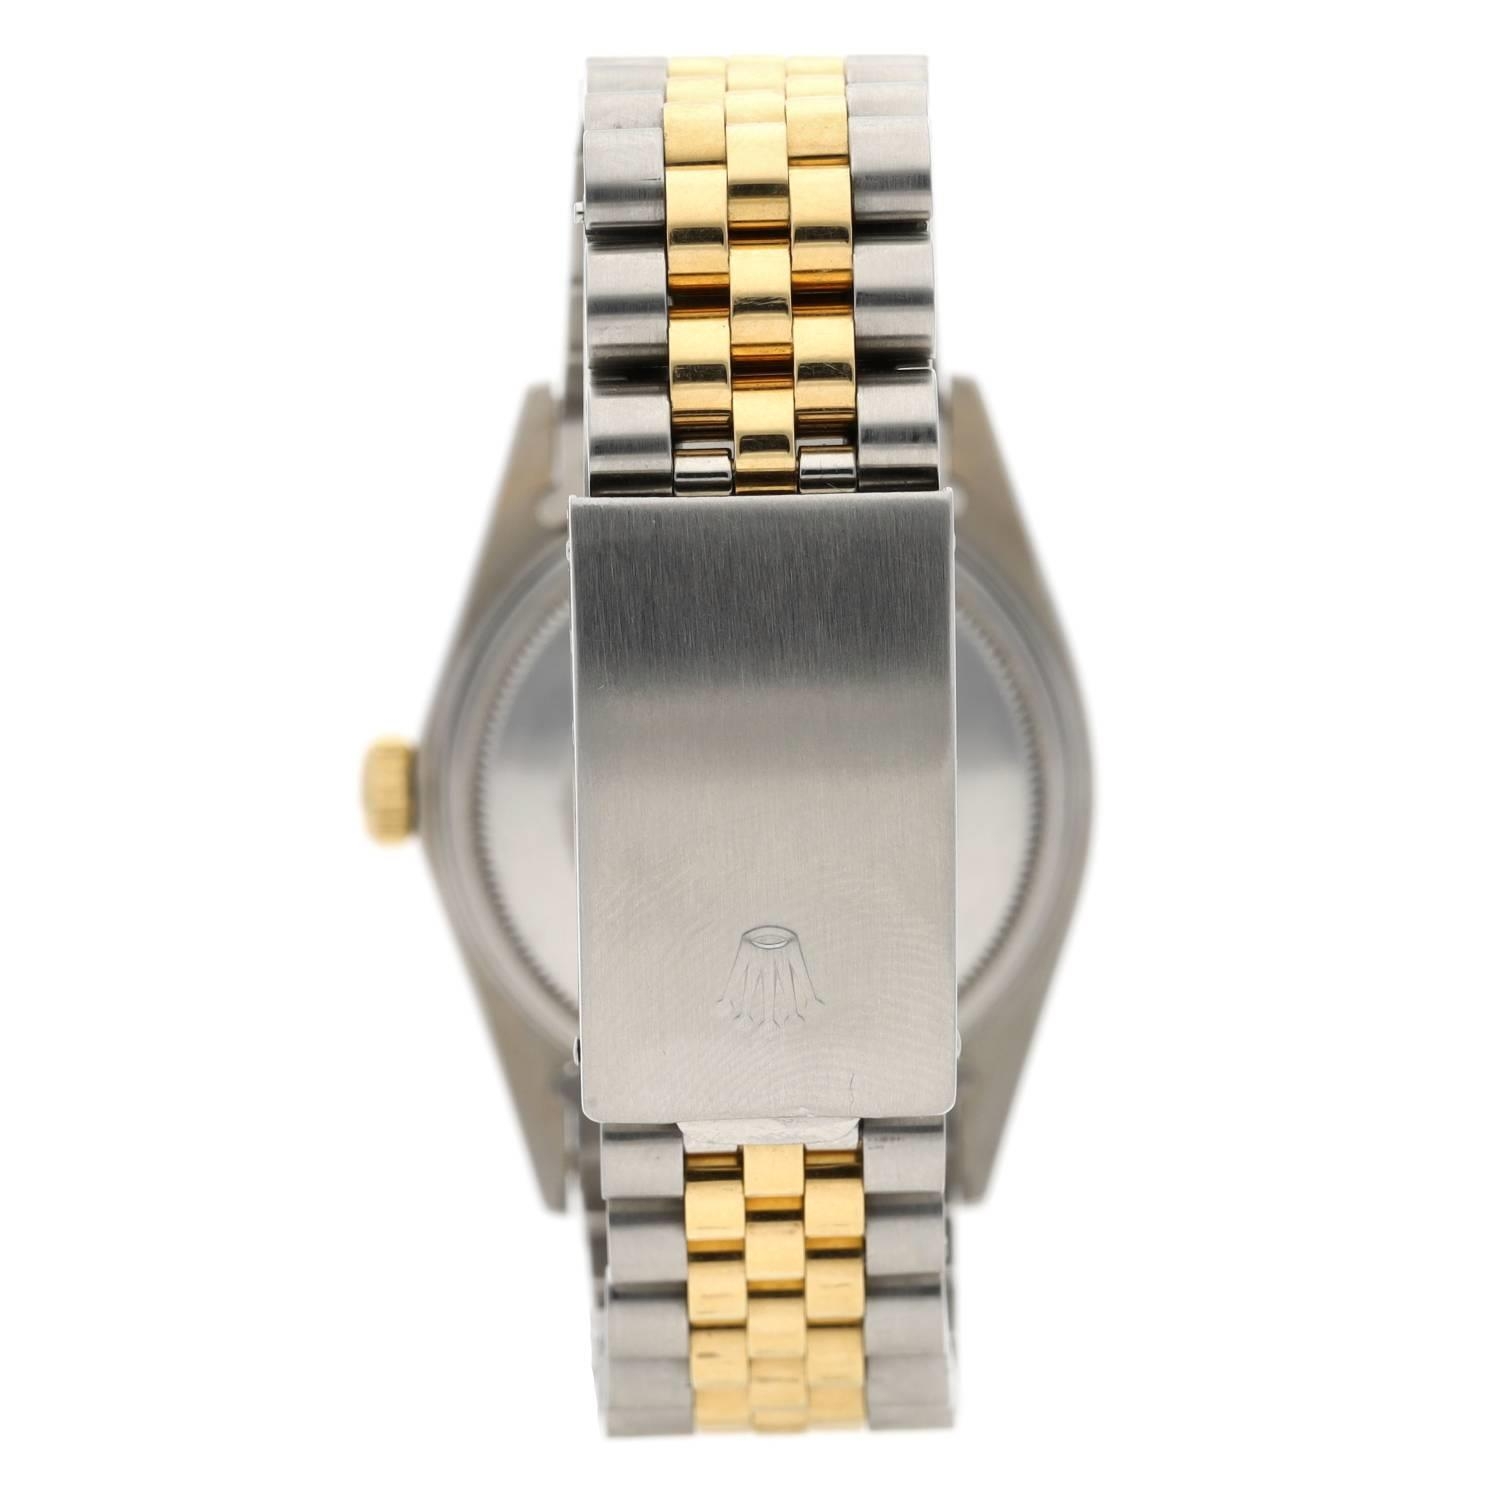 Rolex Oyster Perpetual Datejust gold and stainless steel gentleman's wristwatch, reference no. - Image 4 of 5